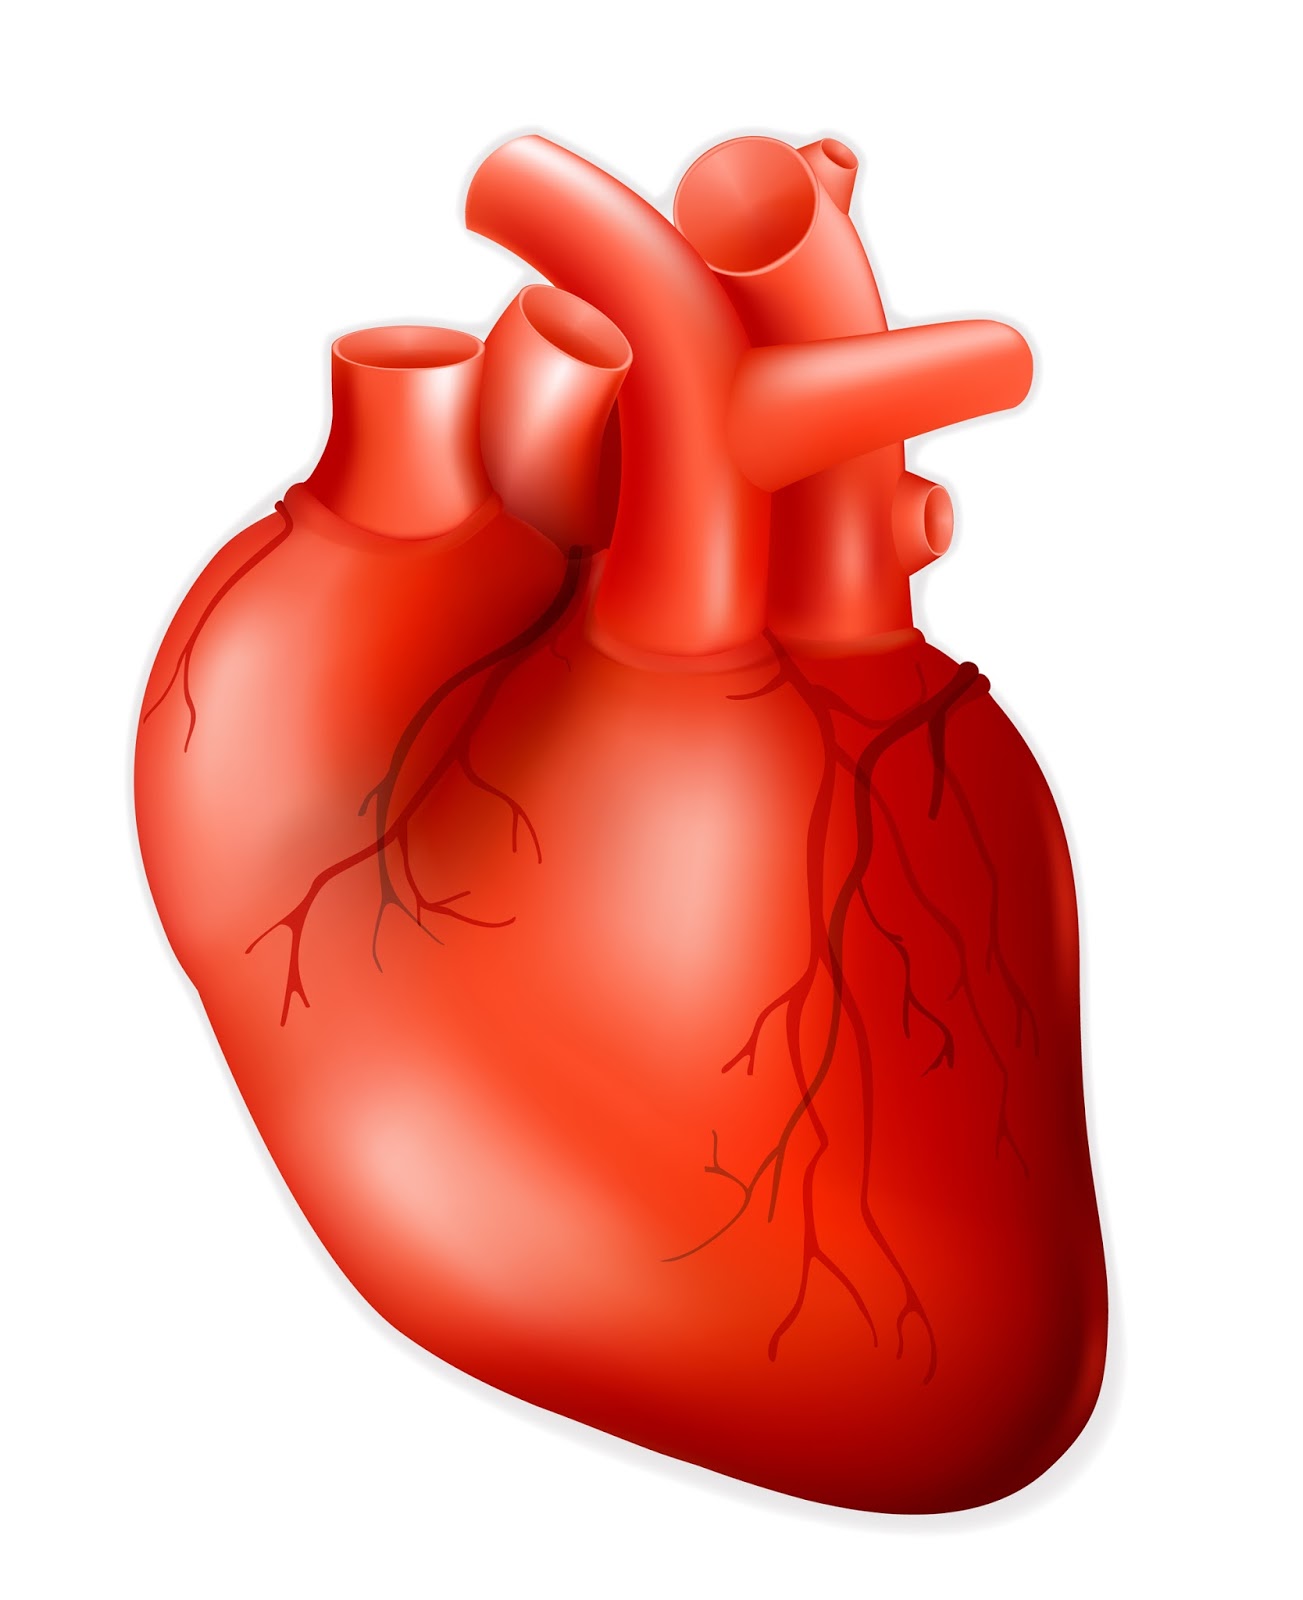 Human Heart Pictures Clip Art 